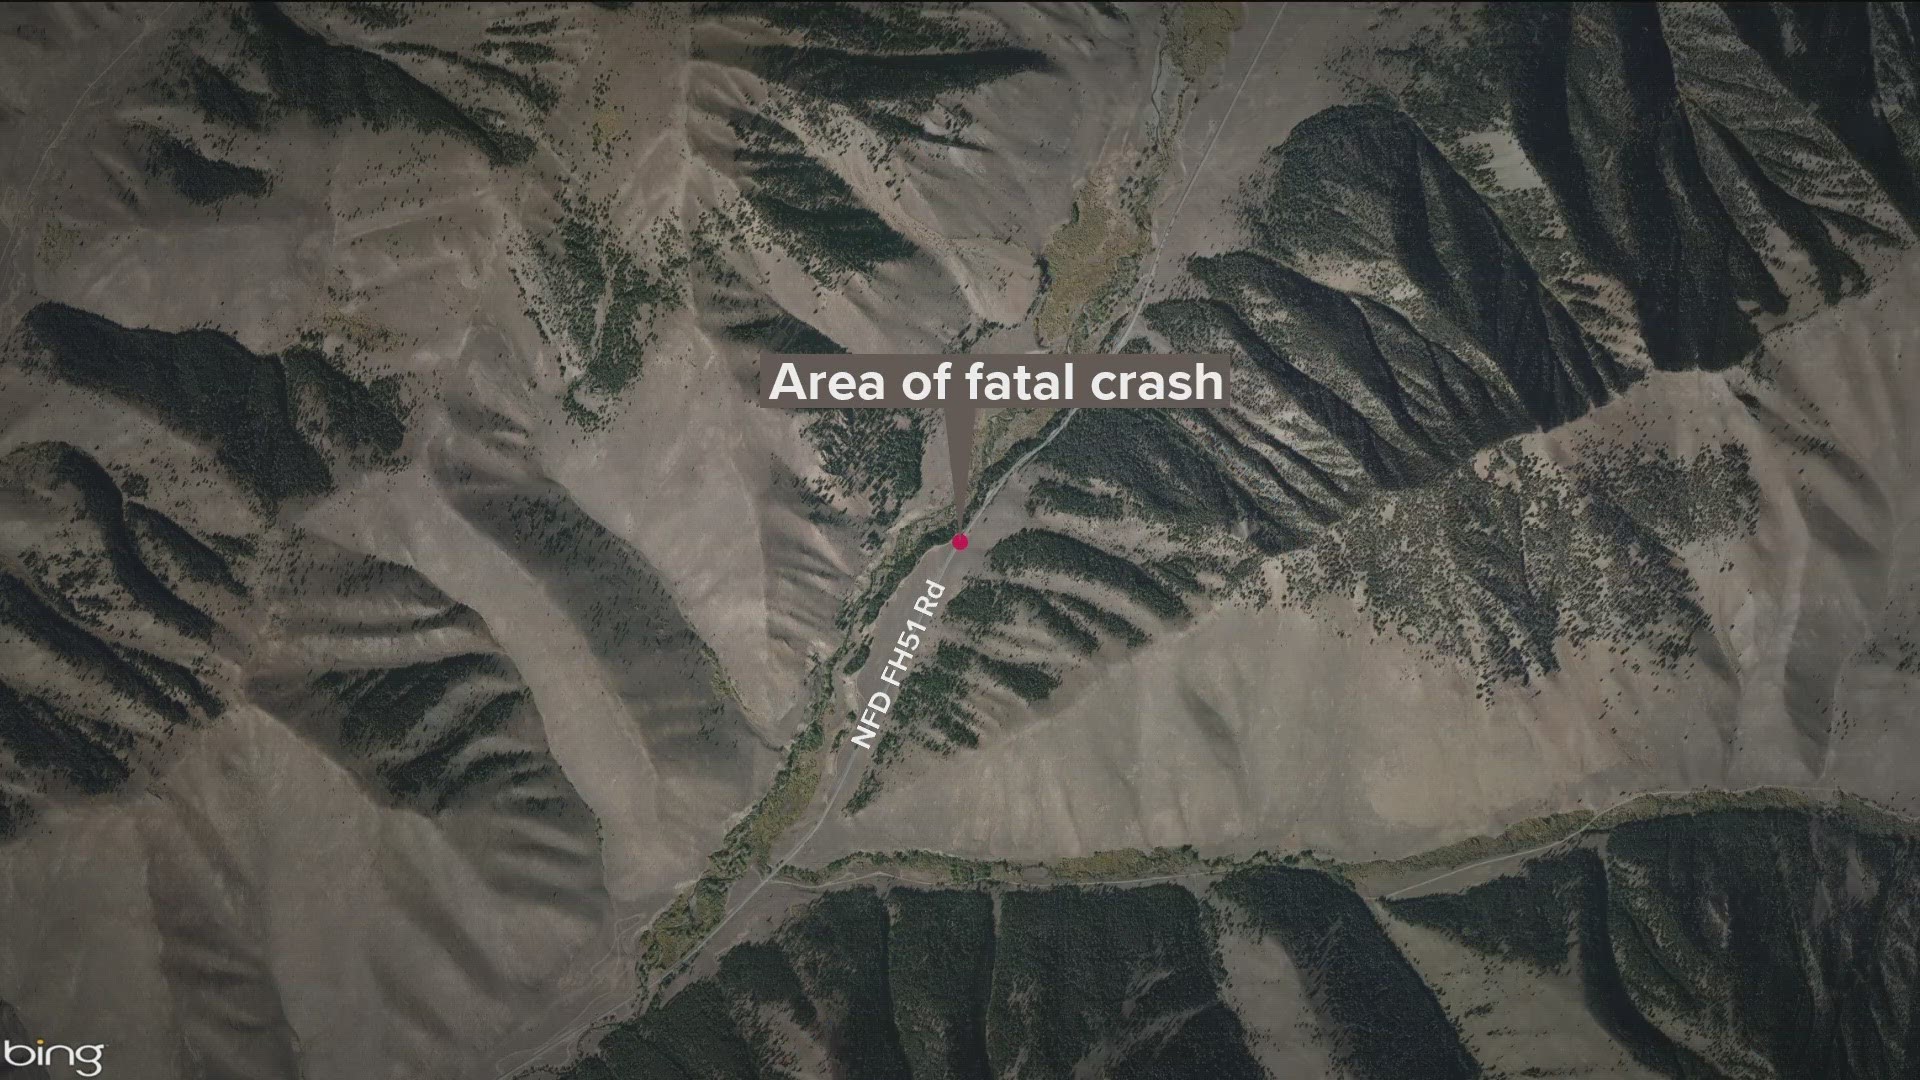 Idaho State Police said the fatal crash occurred on Trail Creek Road when the vehicle went down an embankment and rolled.